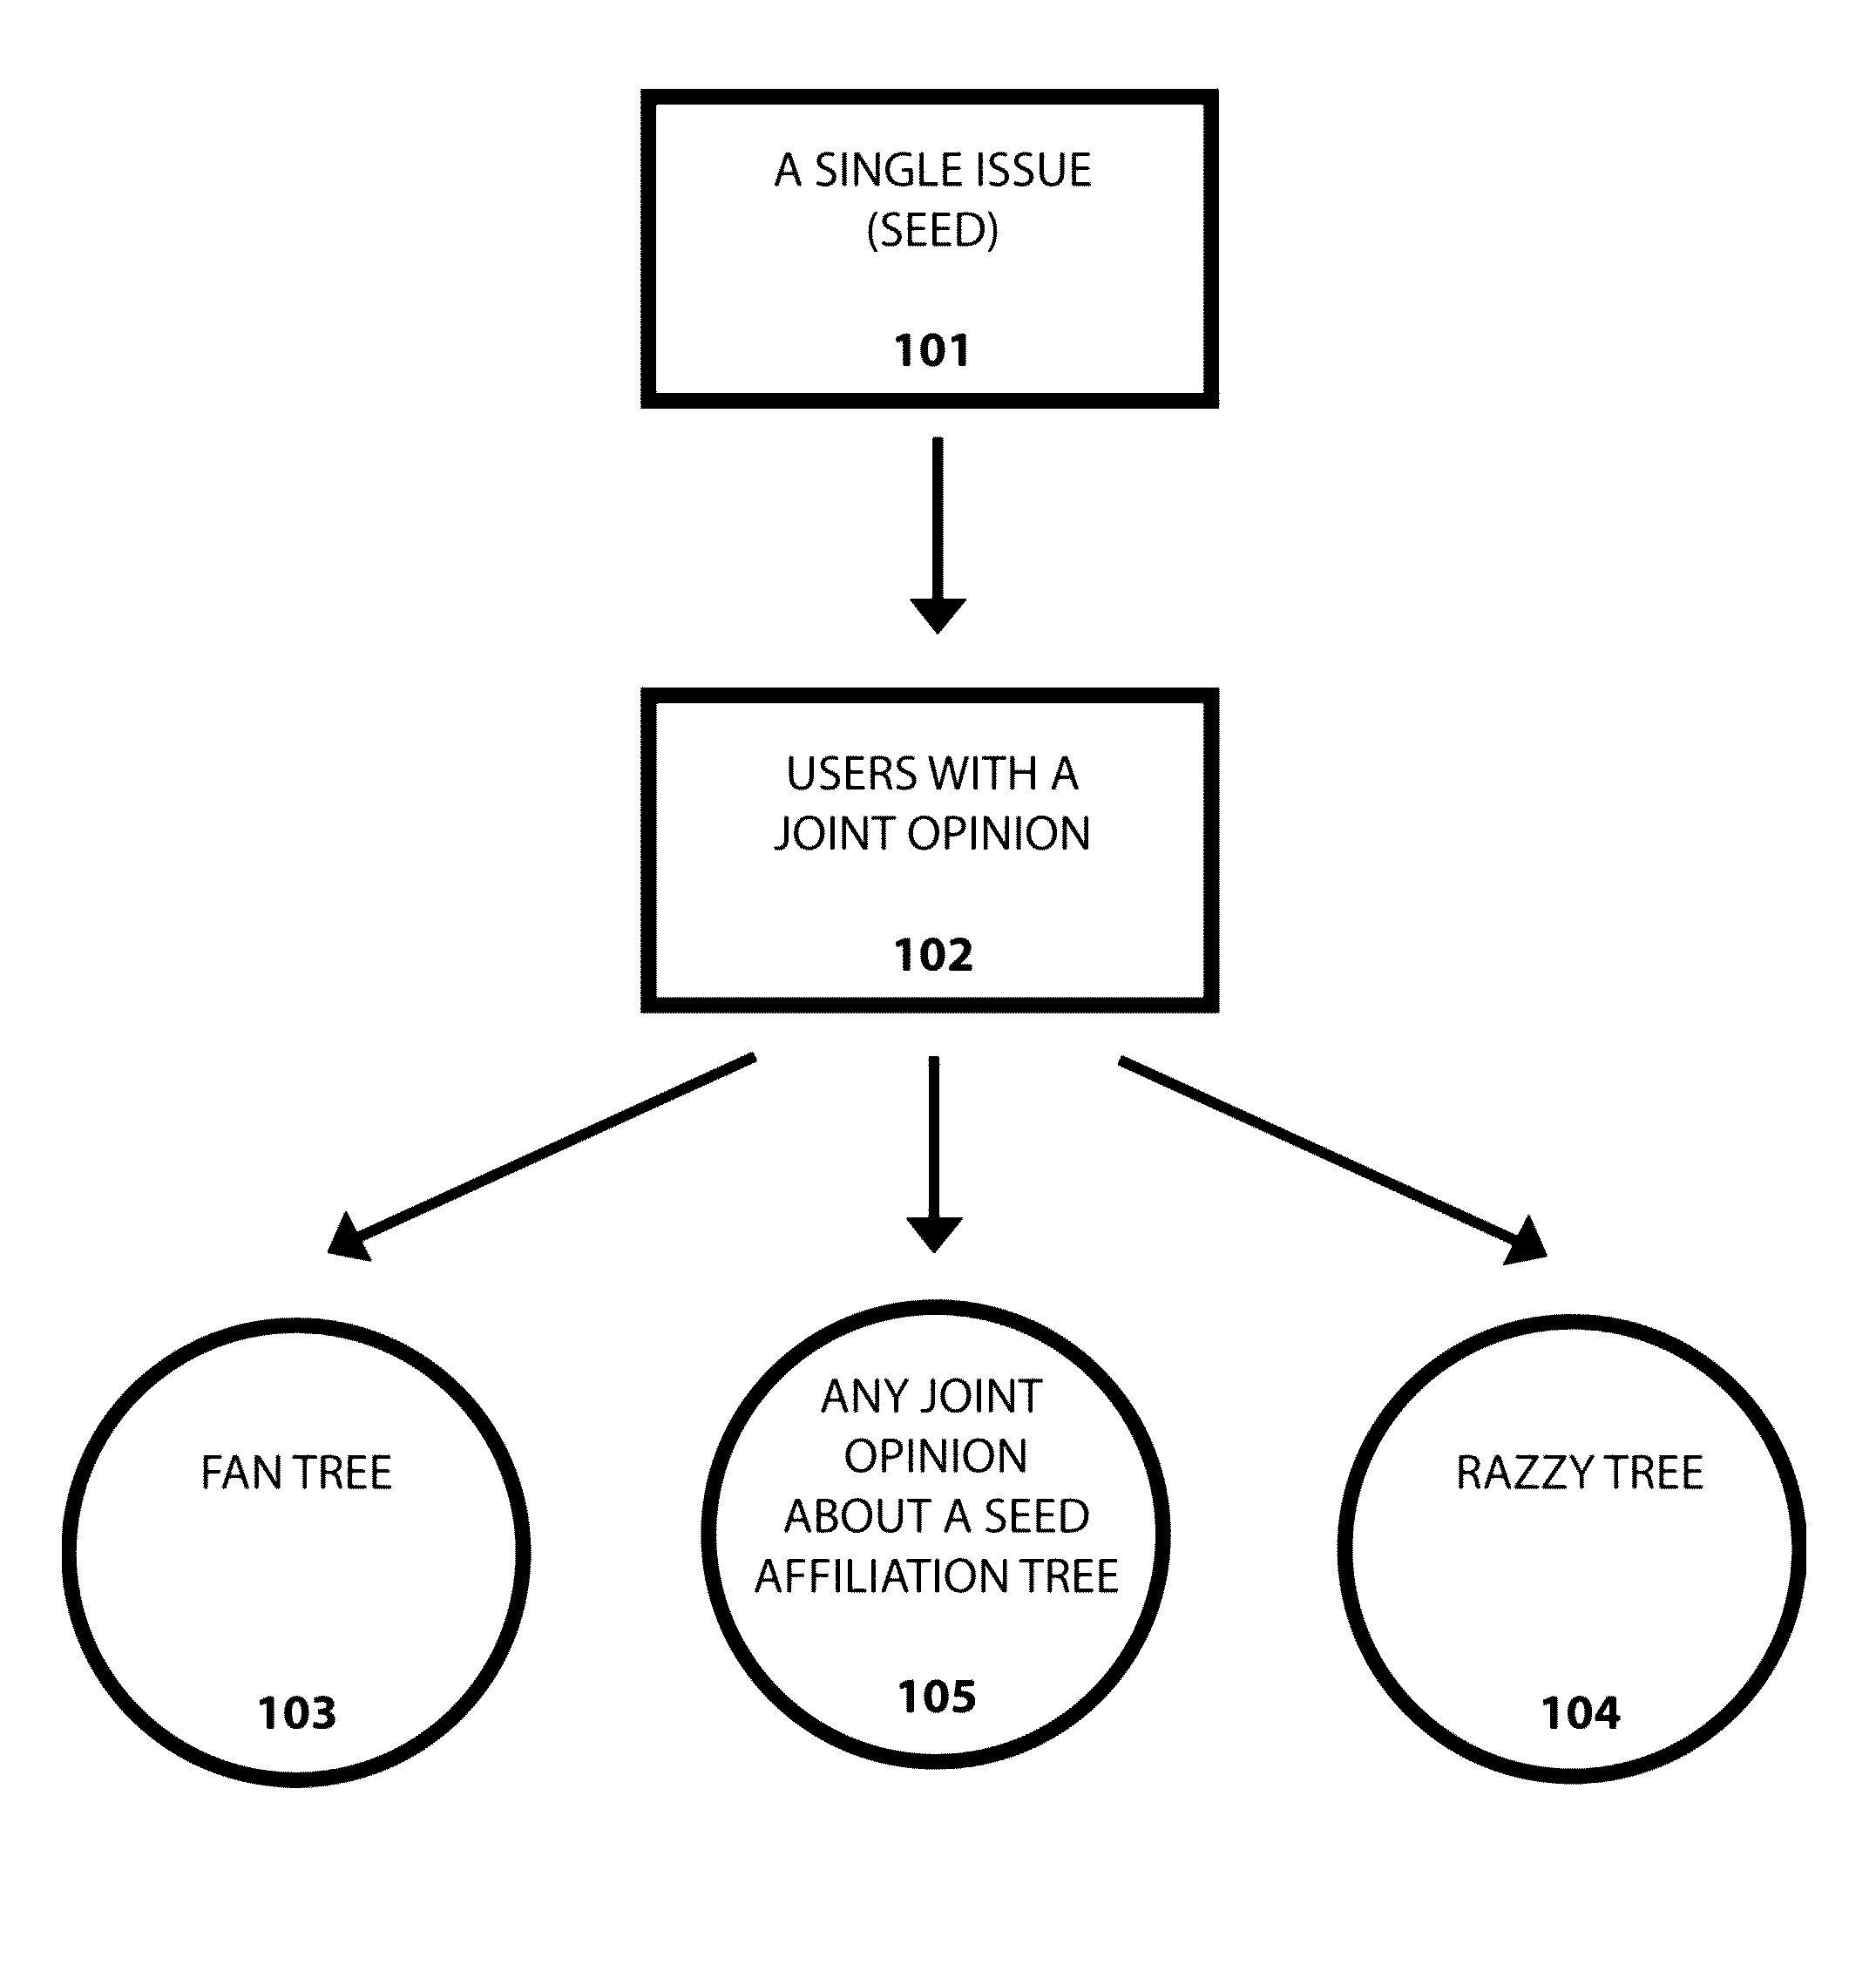 Apparatus and Method for Measuring Social and Prescient Impact